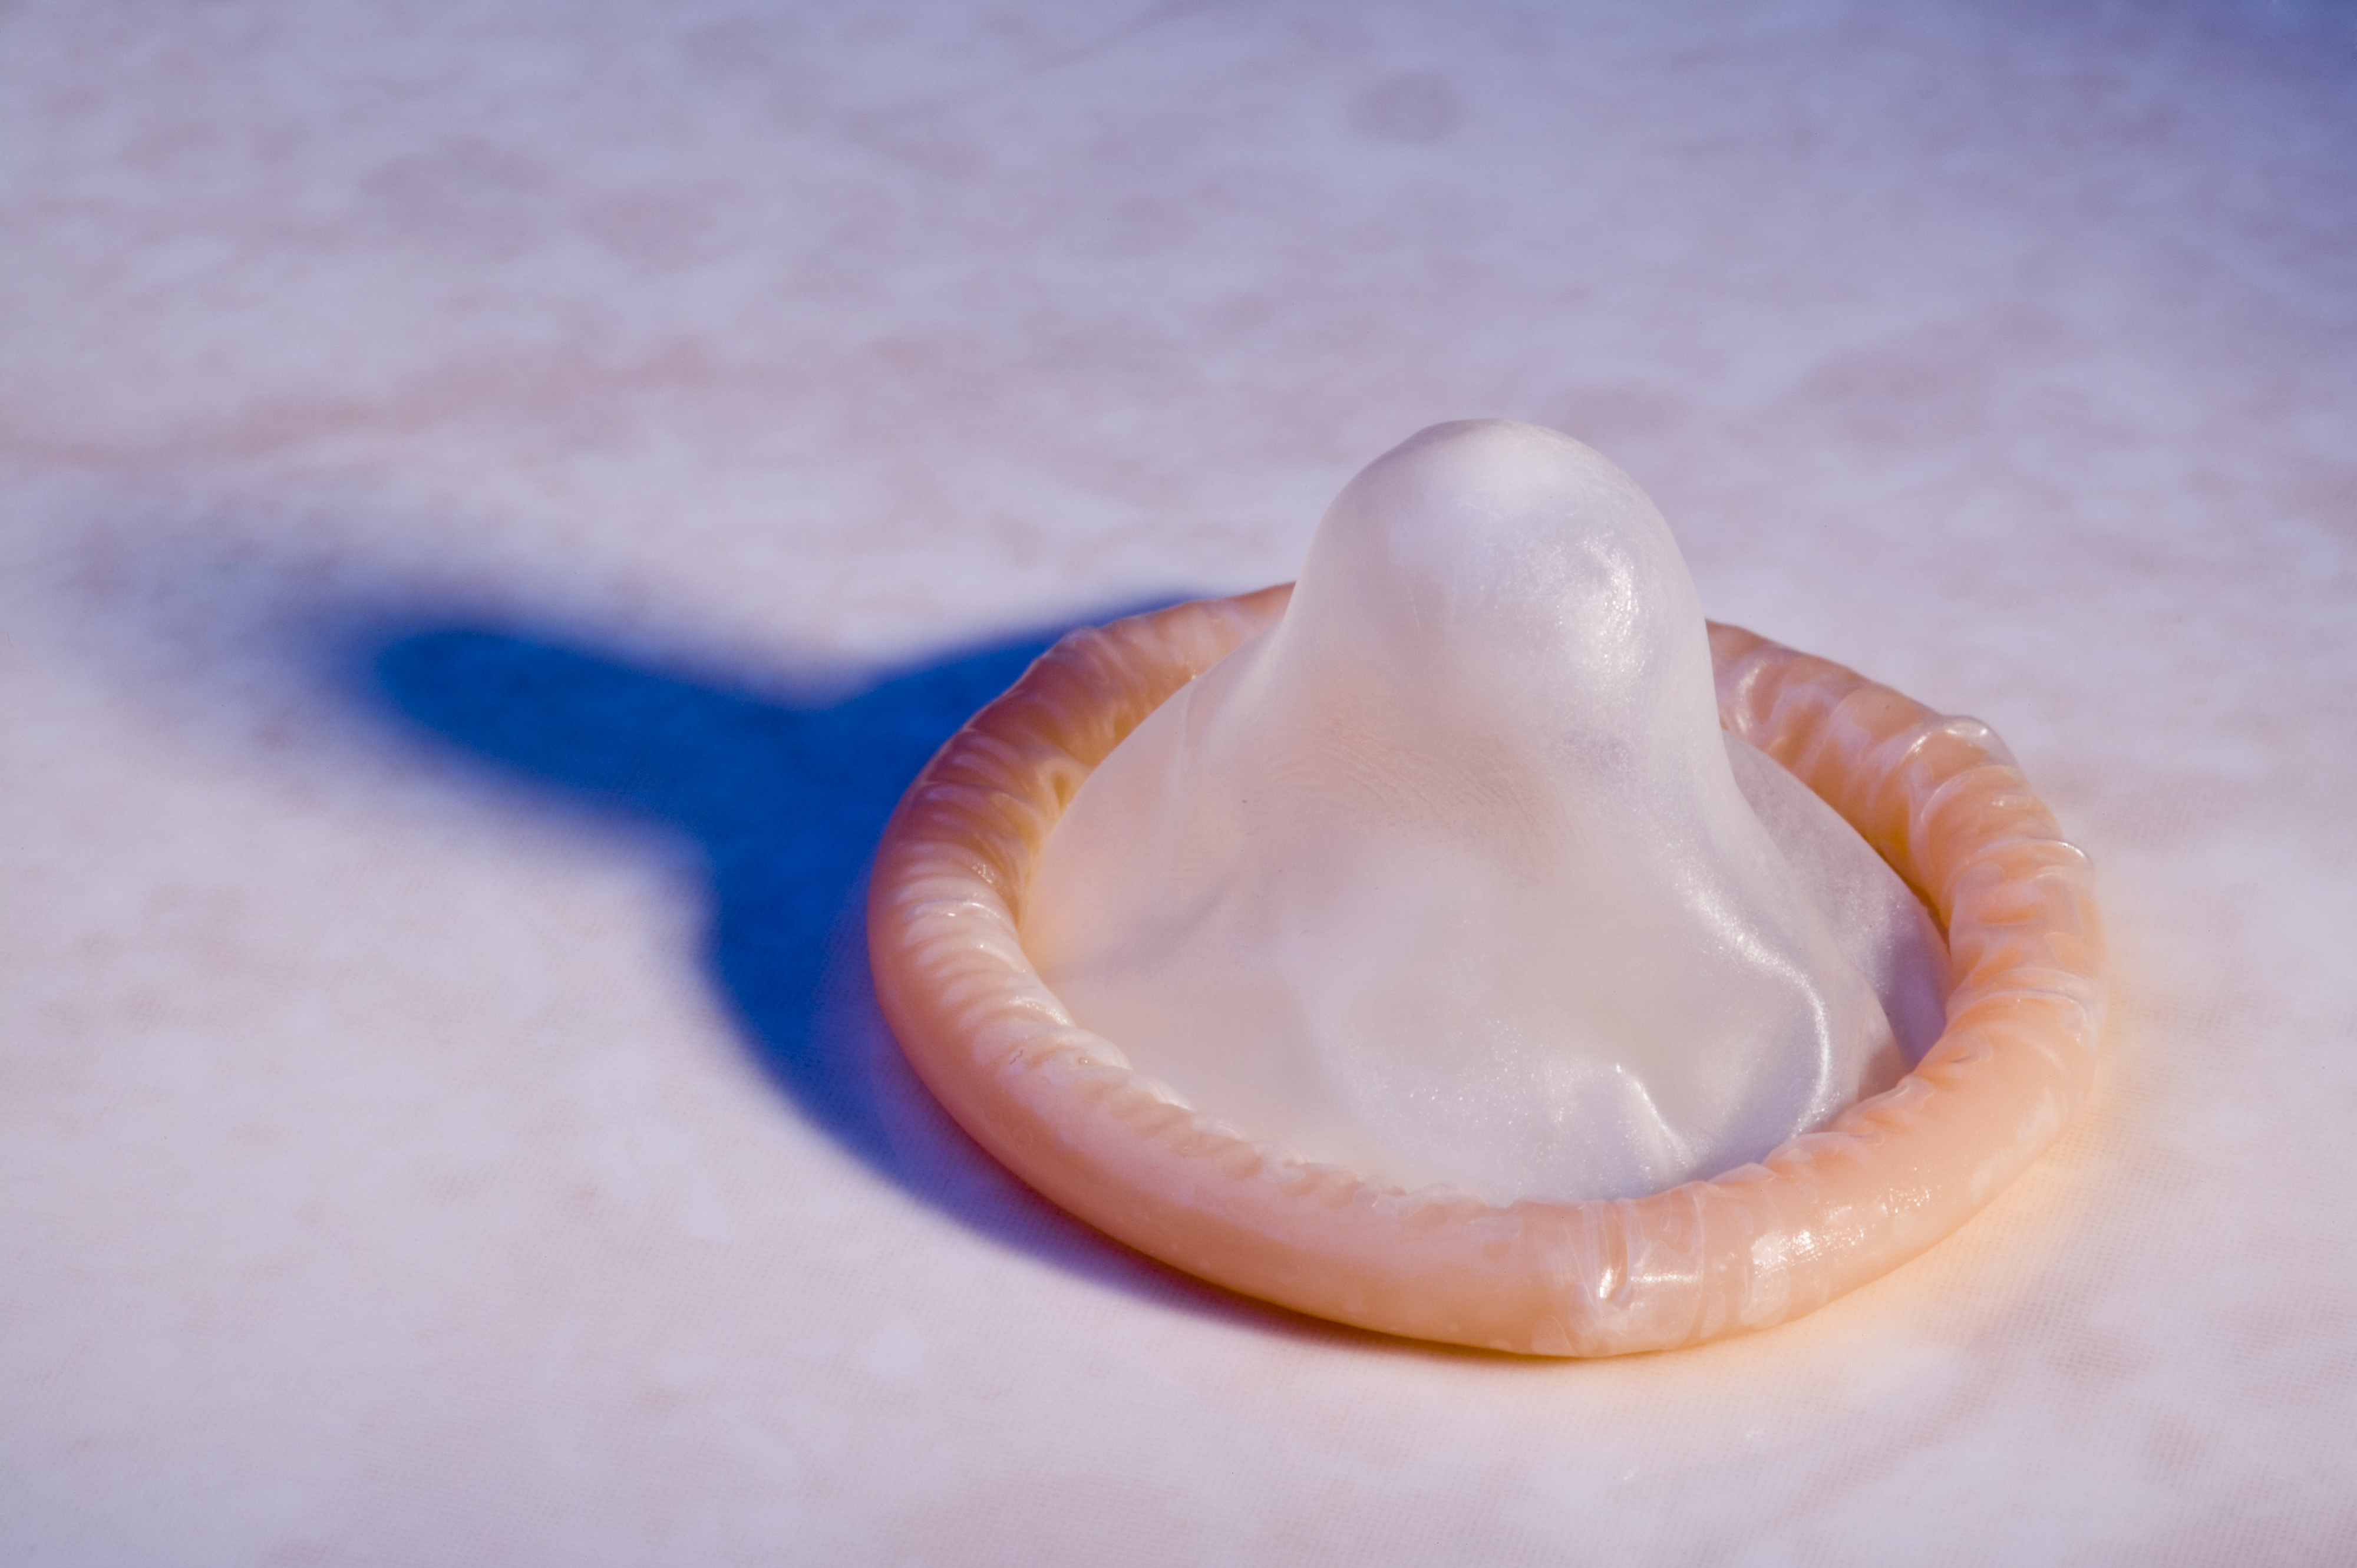 Condom lying on a surface, relevance to travel suggests safe sex practices while traveling